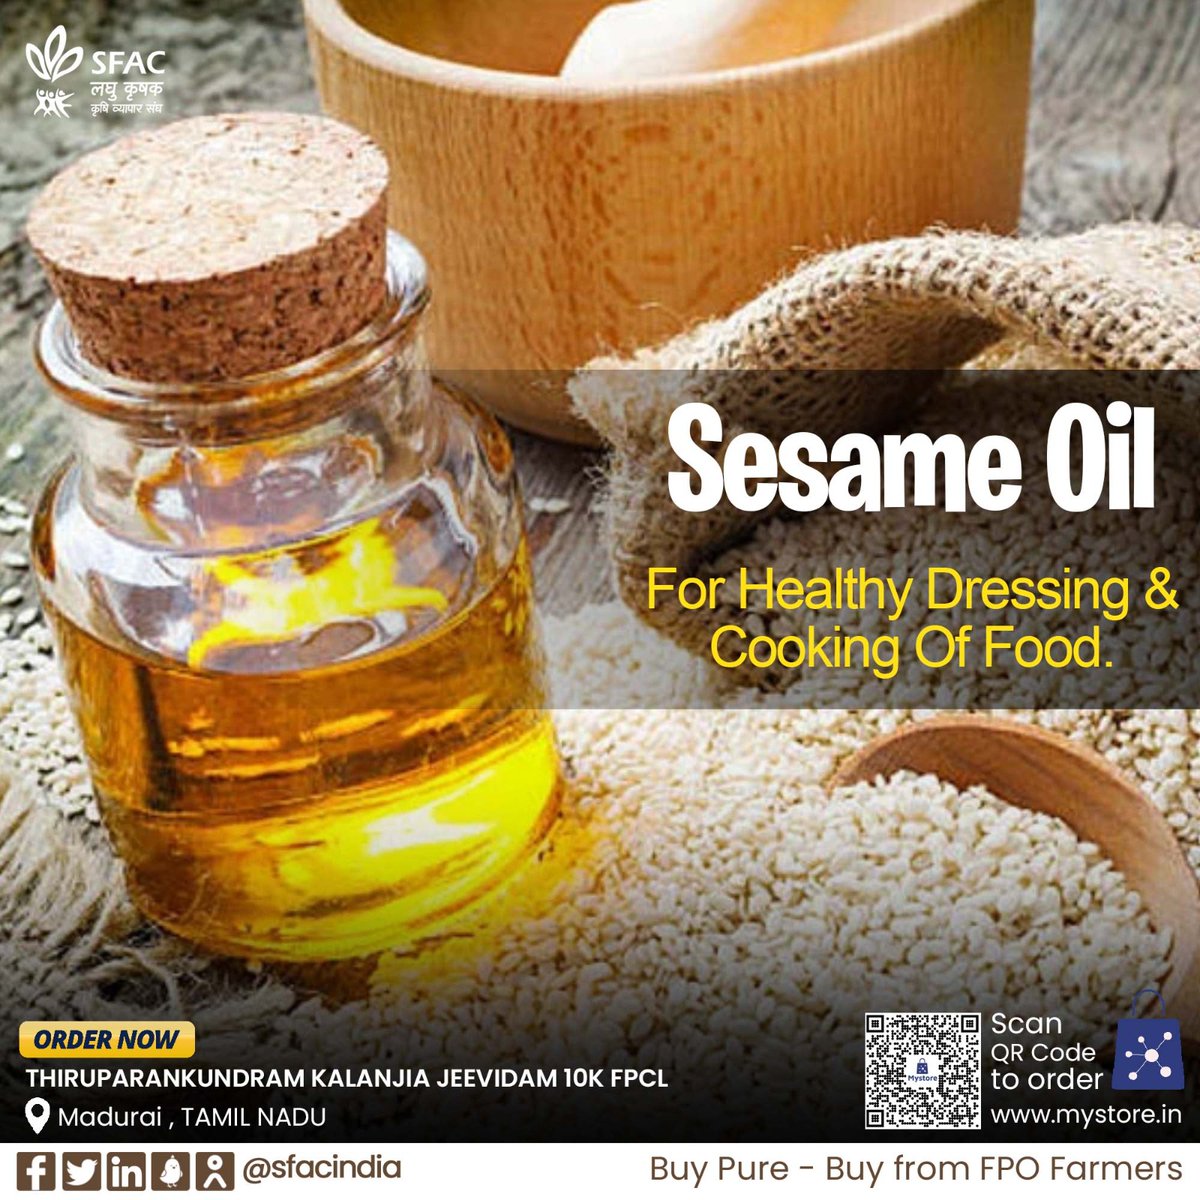 Use organic sesame oil for healthy dressing & cooking of food.
Buy straight from FPO farmers at

mystore.in/en/product/594…

#VocalForLocal #healthychoices #healthyeating #HealthyFood #HealthyDiets #Foodie #HealthySkin